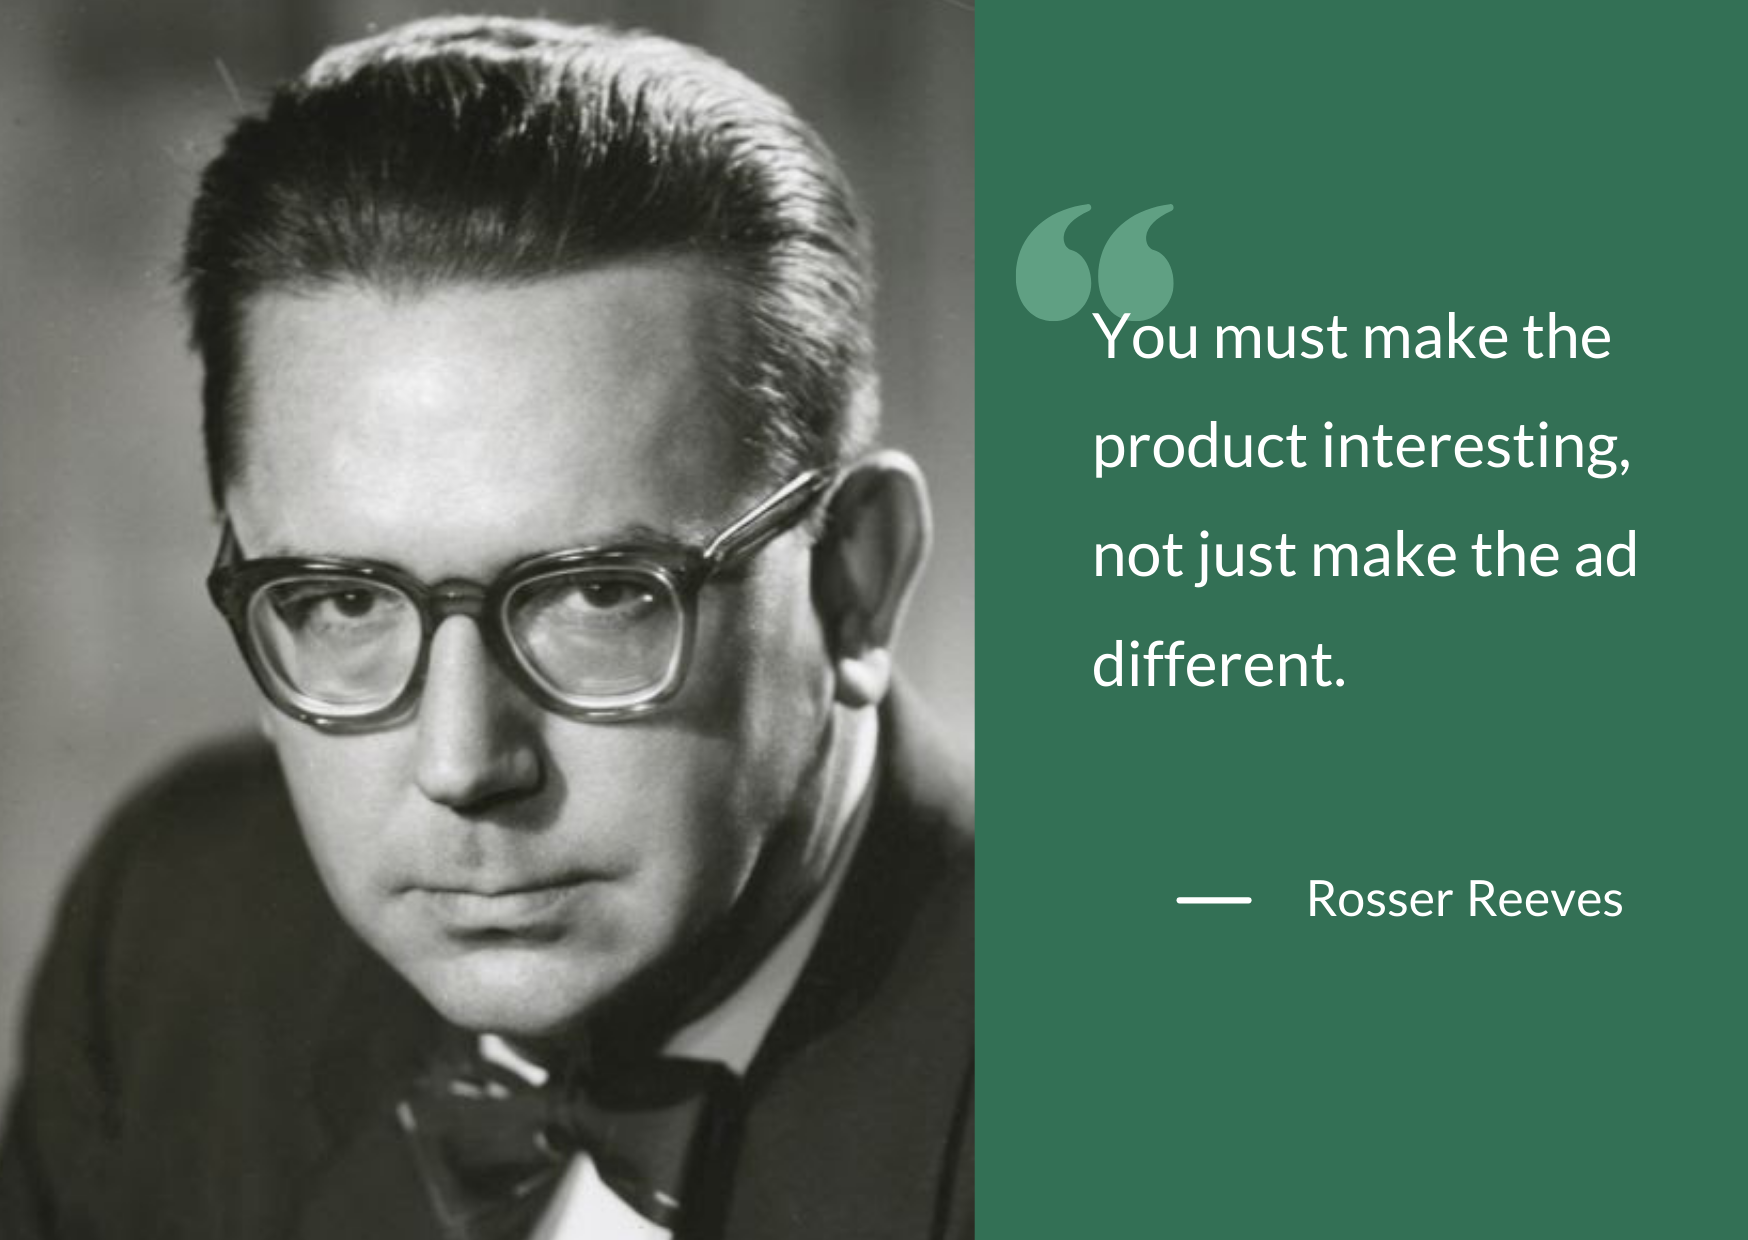 Rosser Reeves marketing quote